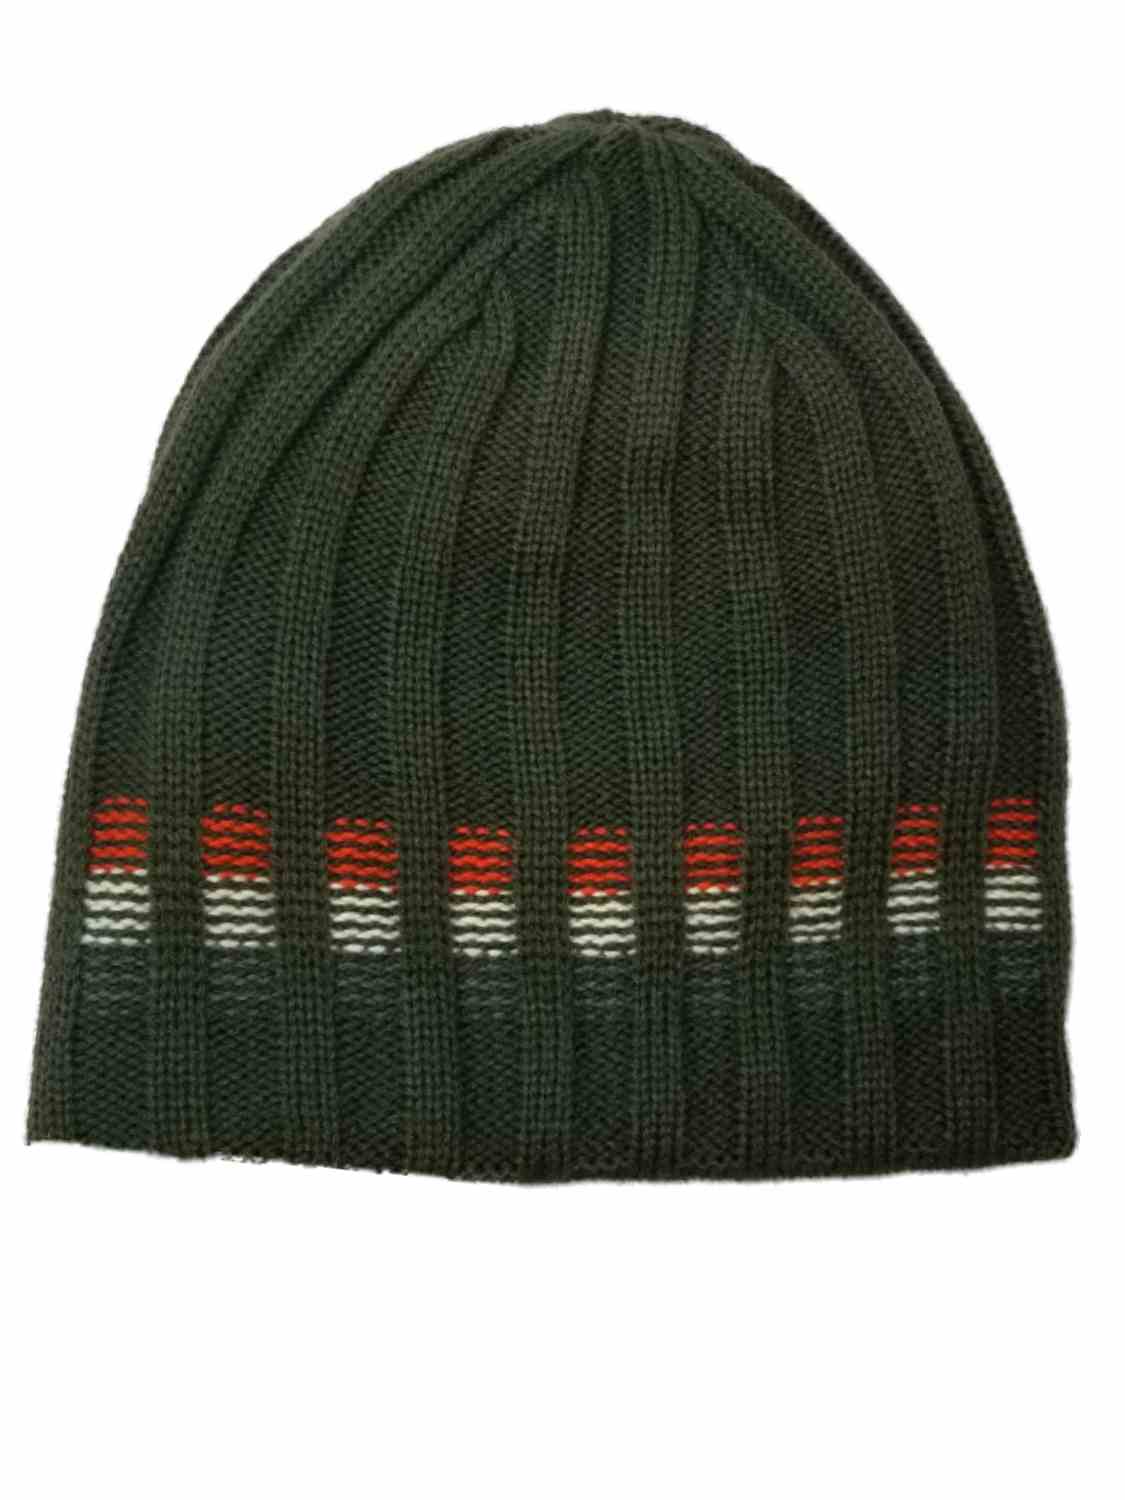 Men's Olive Green with Accent stripe Winter Reversible Beanie Stocking Cap Hat - image 1 of 2